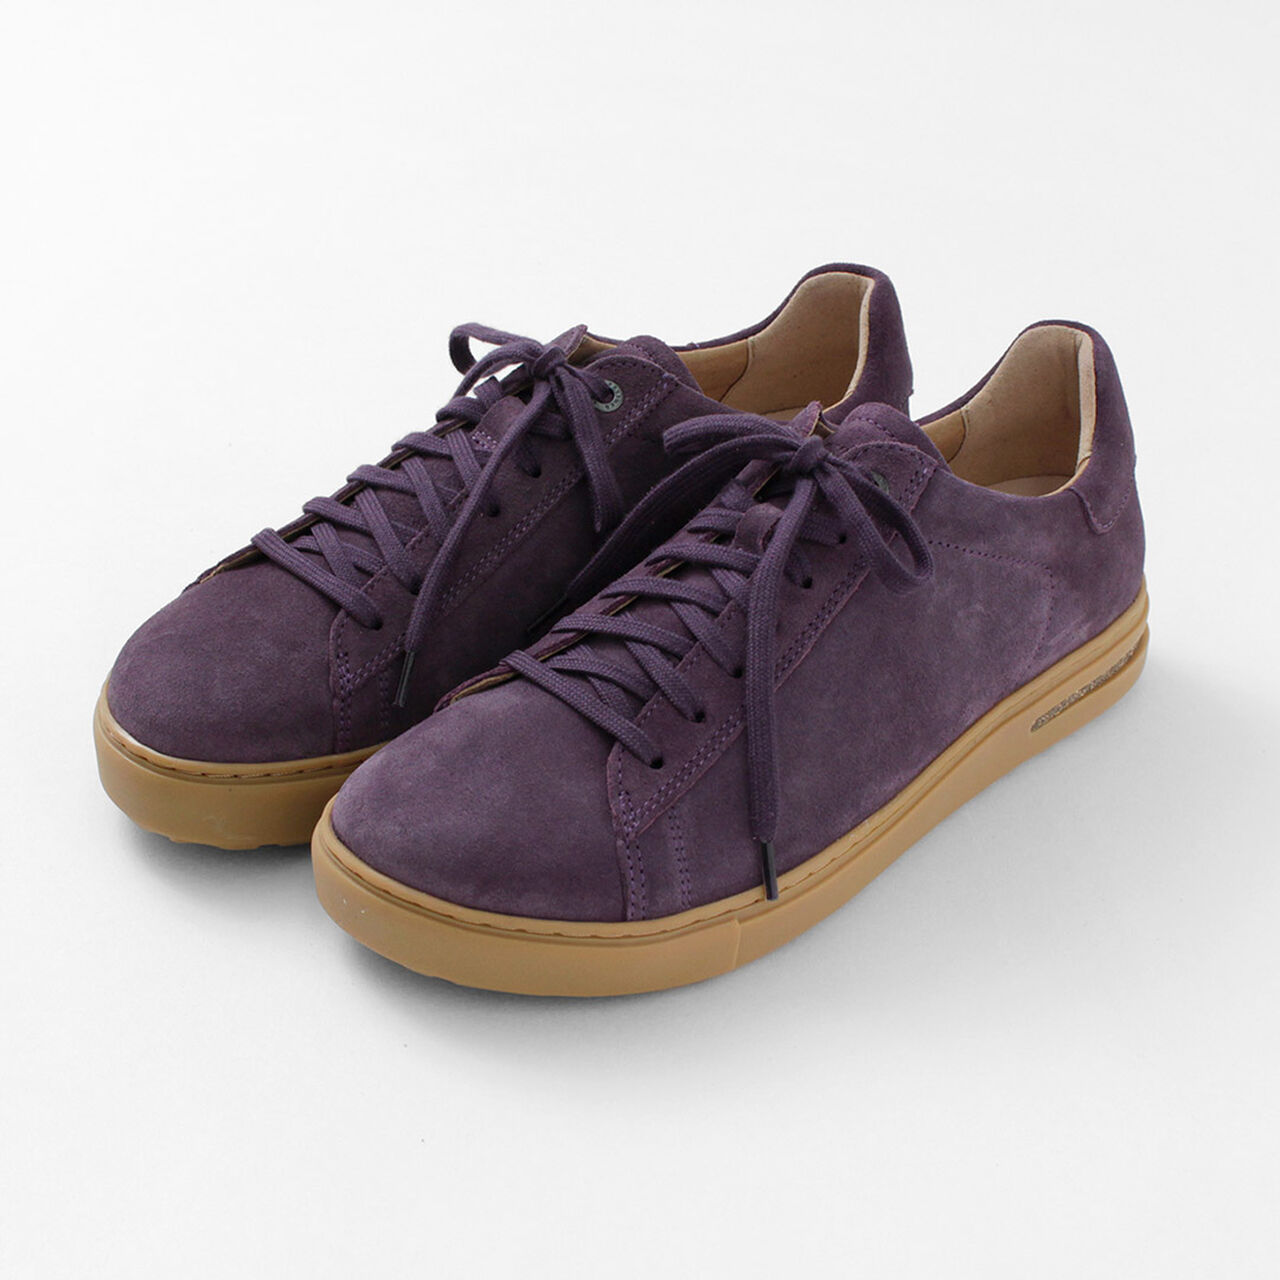 Bend Low / Suede Leather Velour Leather Leather Sneakers,DarkBerry, large image number 0